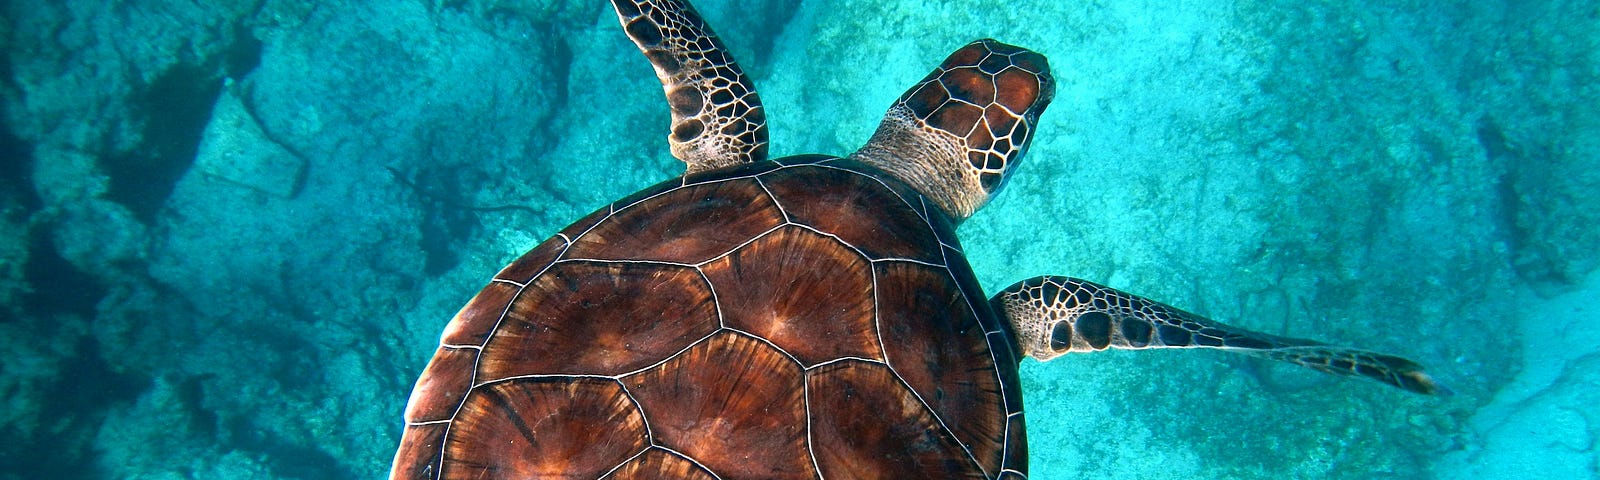 A turtle, seen from above, swimming in turquoise waters, above the rocky sea floor.